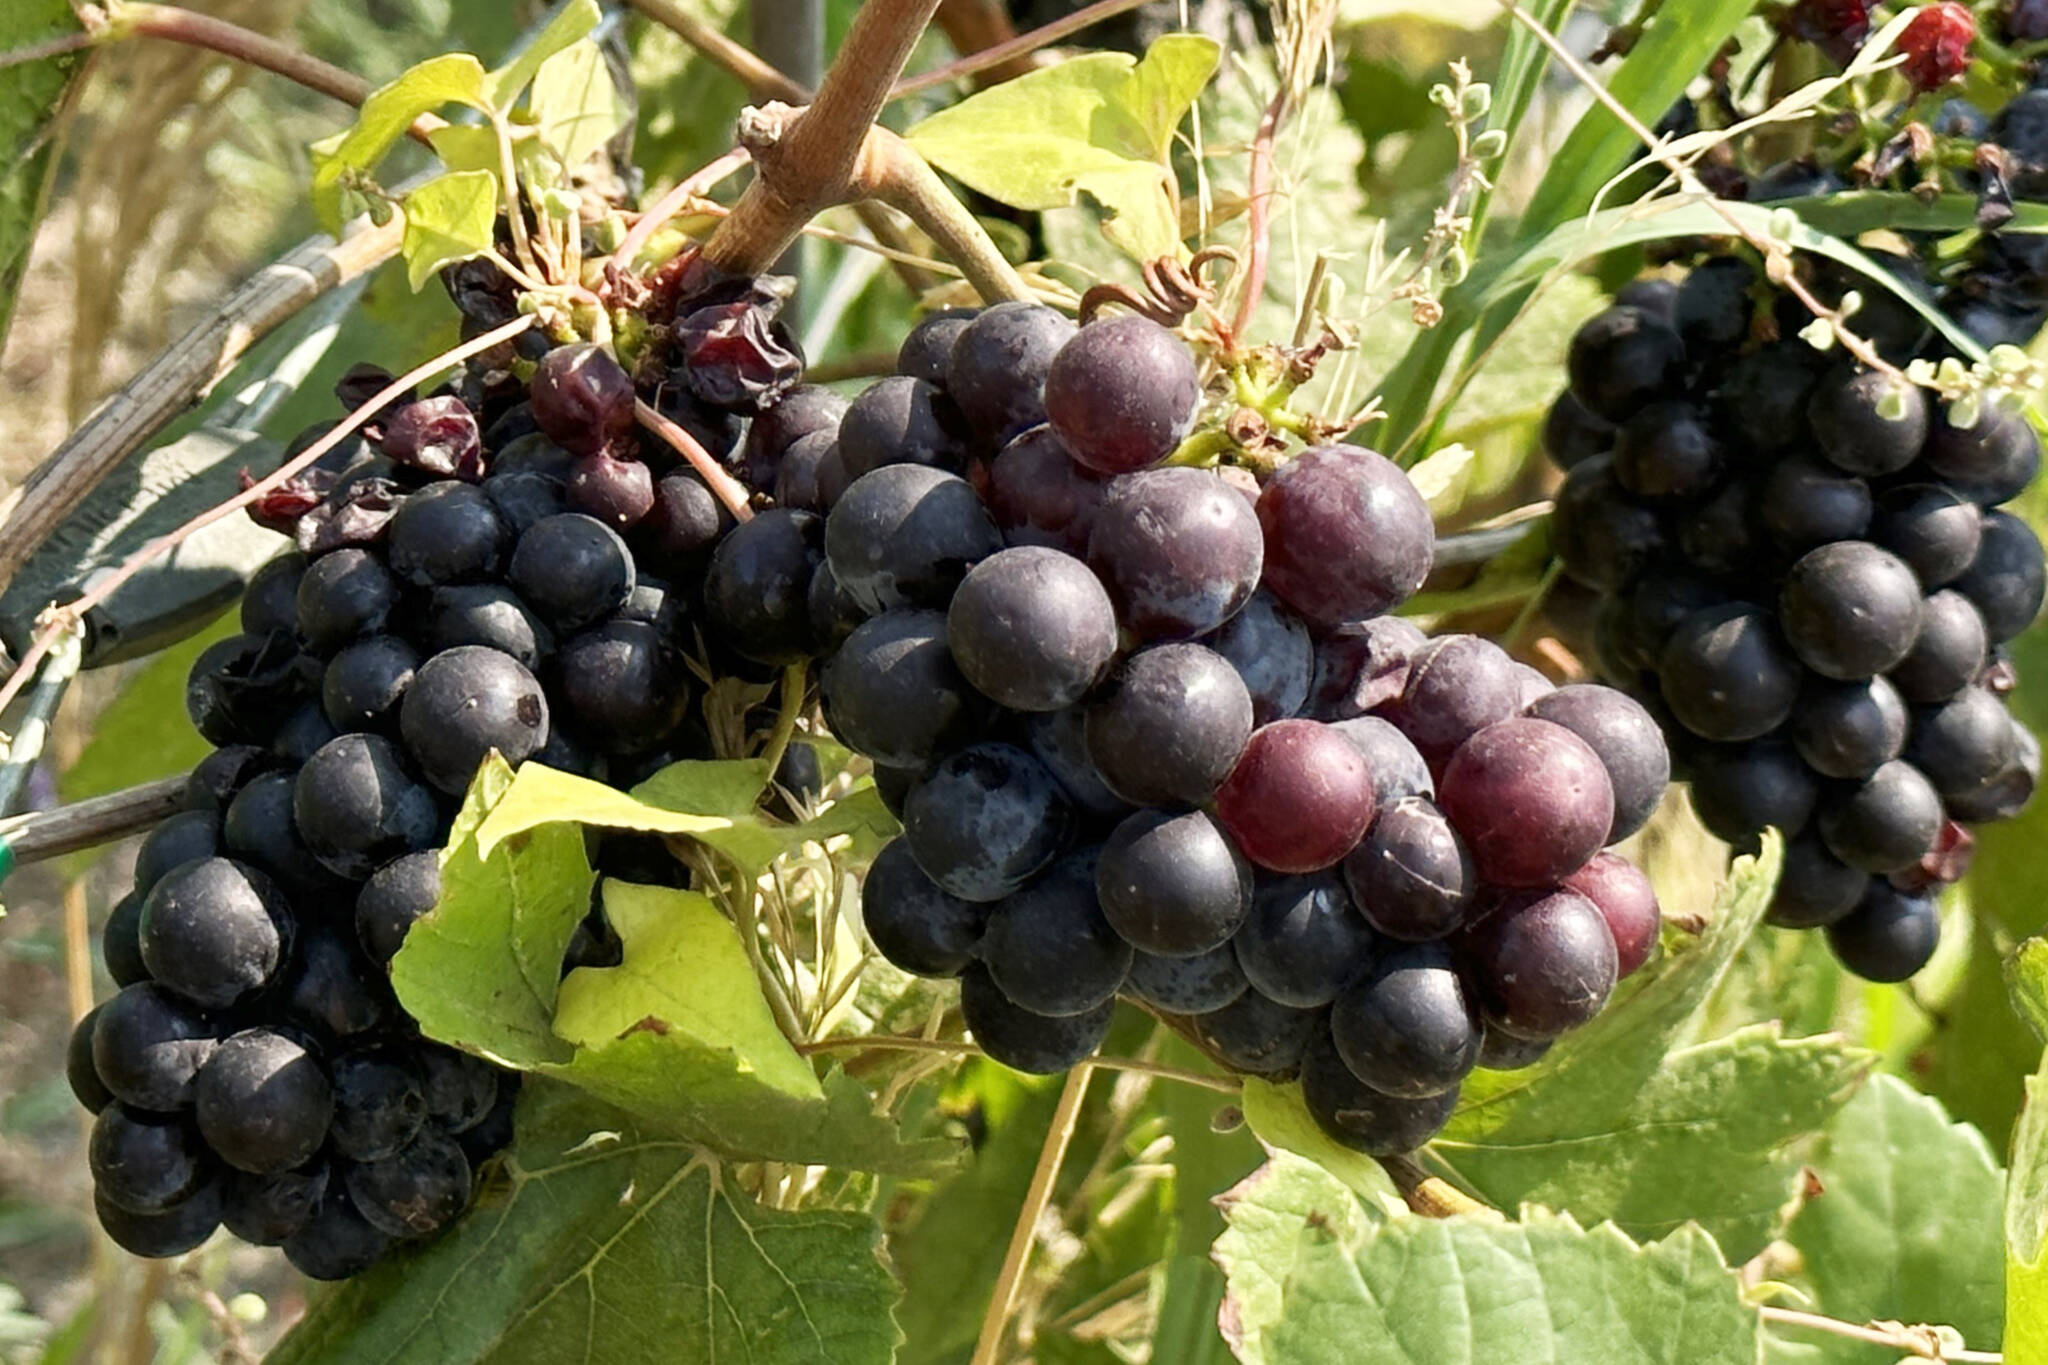 Grape growing has become the dominant use of farm land in the Okanagan Valley. Members of the Regional District of Okanagan-Similkameen board are questioning the long-term viability of grape growing, following two recent severe cold snaps. (Black Press file photo)